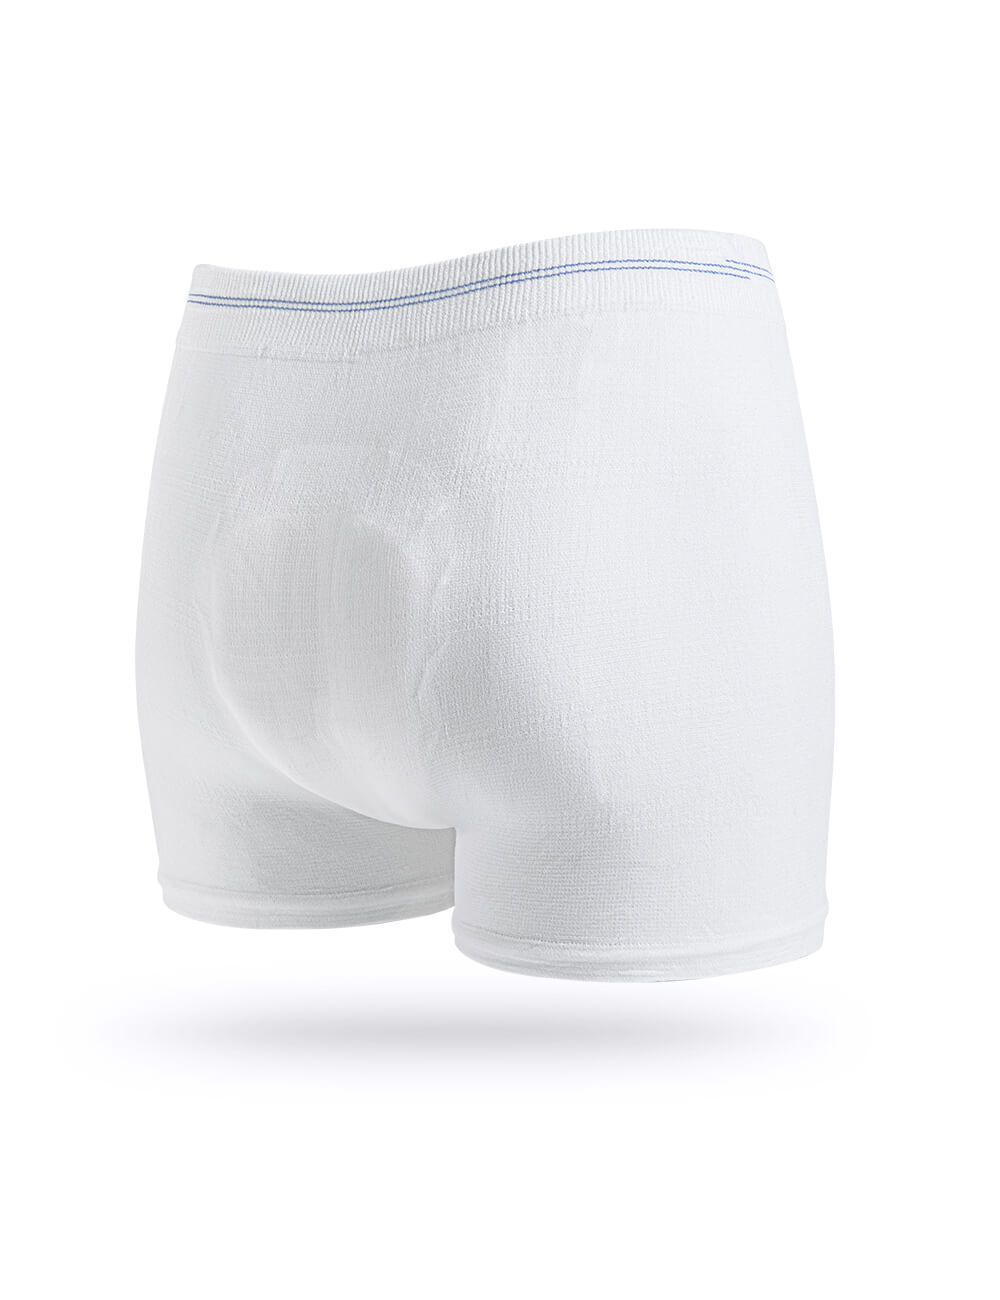 Postpartum Disposable Mesh Underwear For C-Section & Incontinence